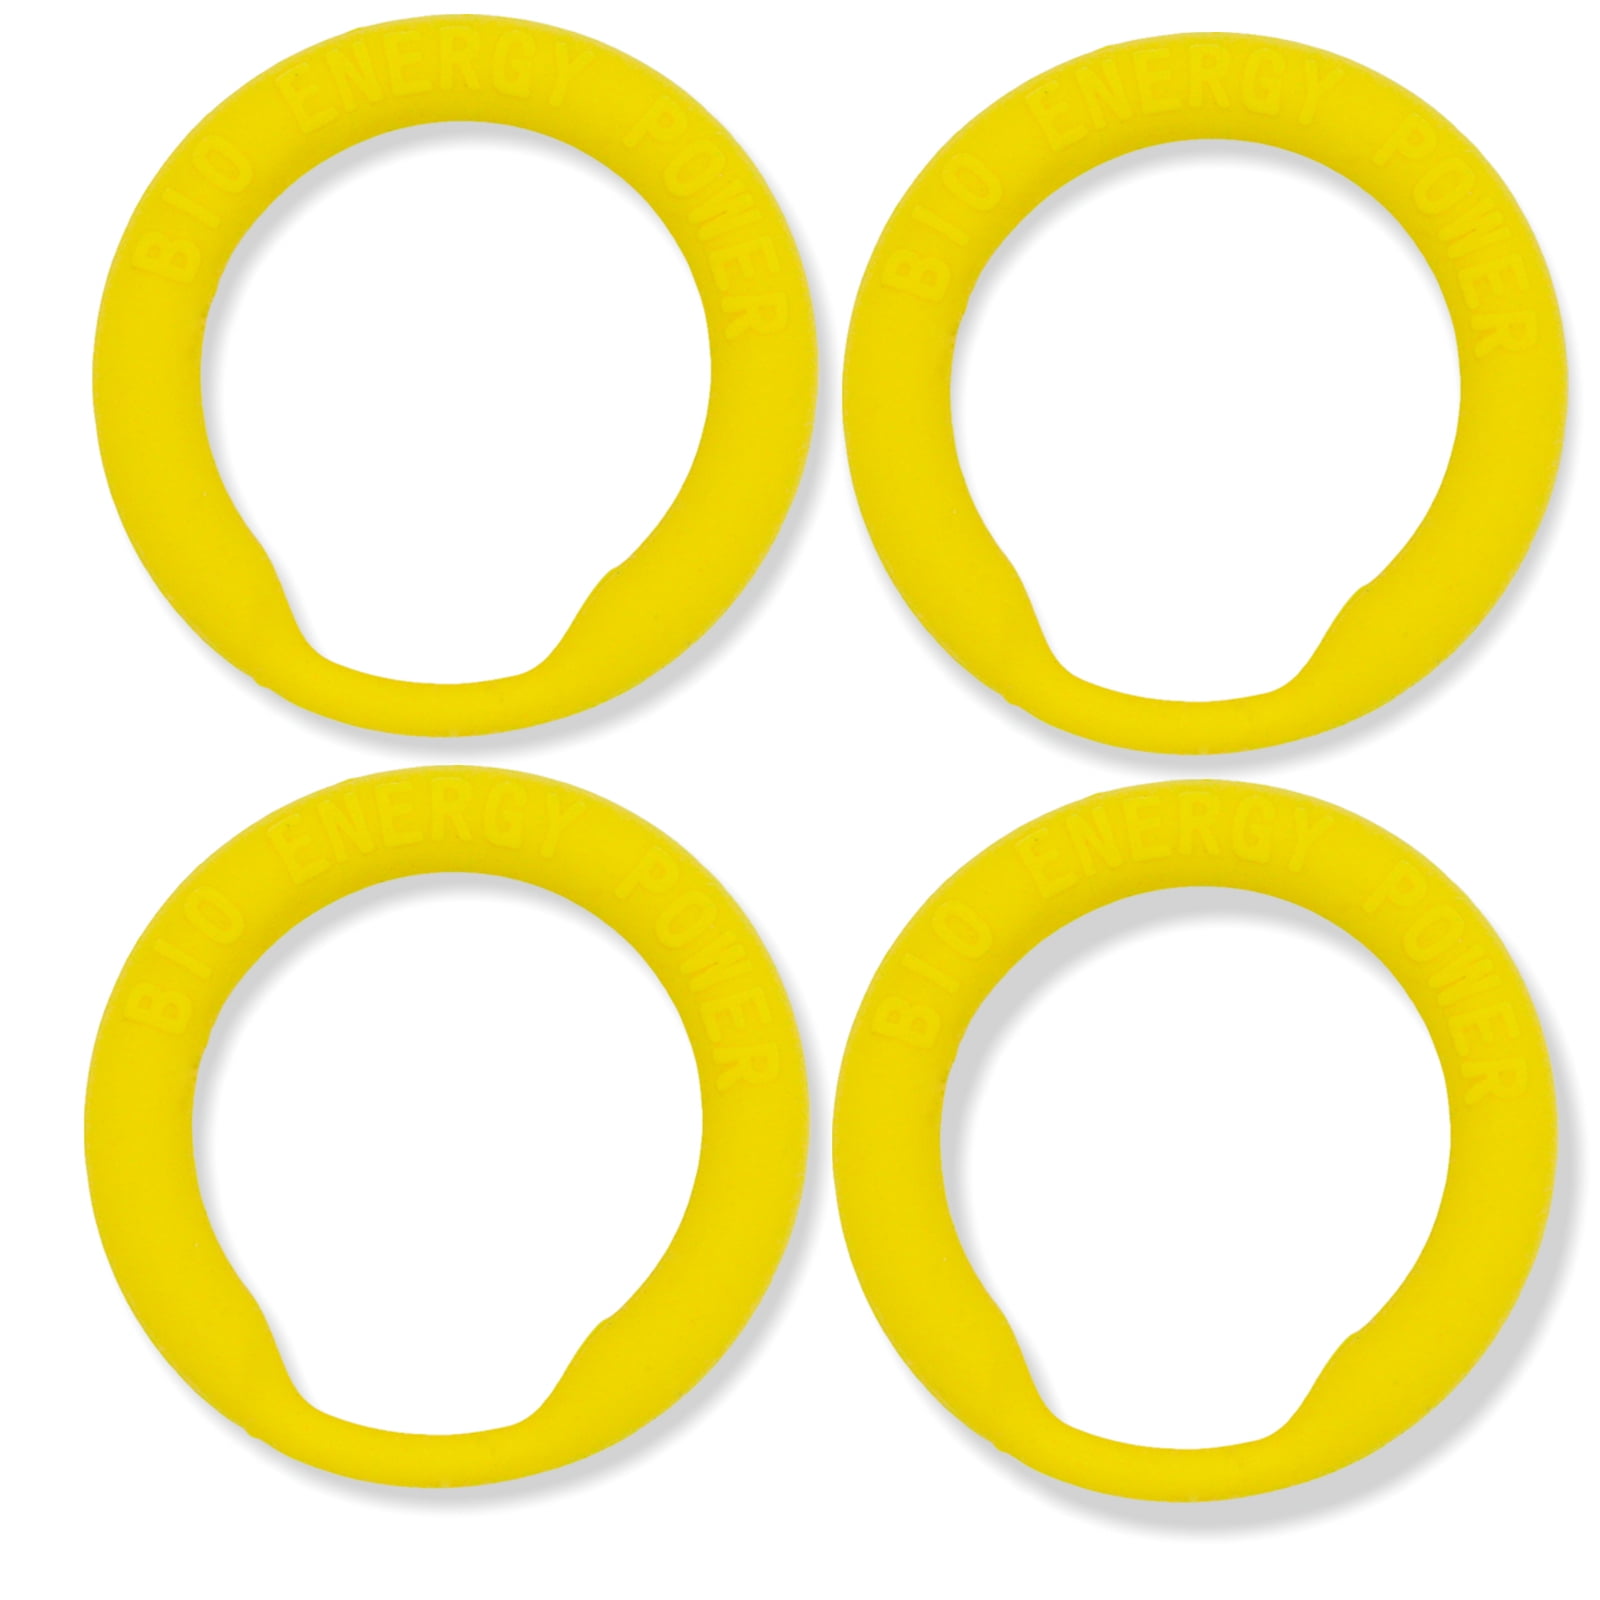 LeLuv Power Penis Ring Energy Silicone Penis Constriction Ring Yellow 4 Pack XL ID 34 mm a2a1e7c4 e0d9 4365 a1f8 159c0eceee88.dbf8fdaf7eb7ac65f60d4507553e9665